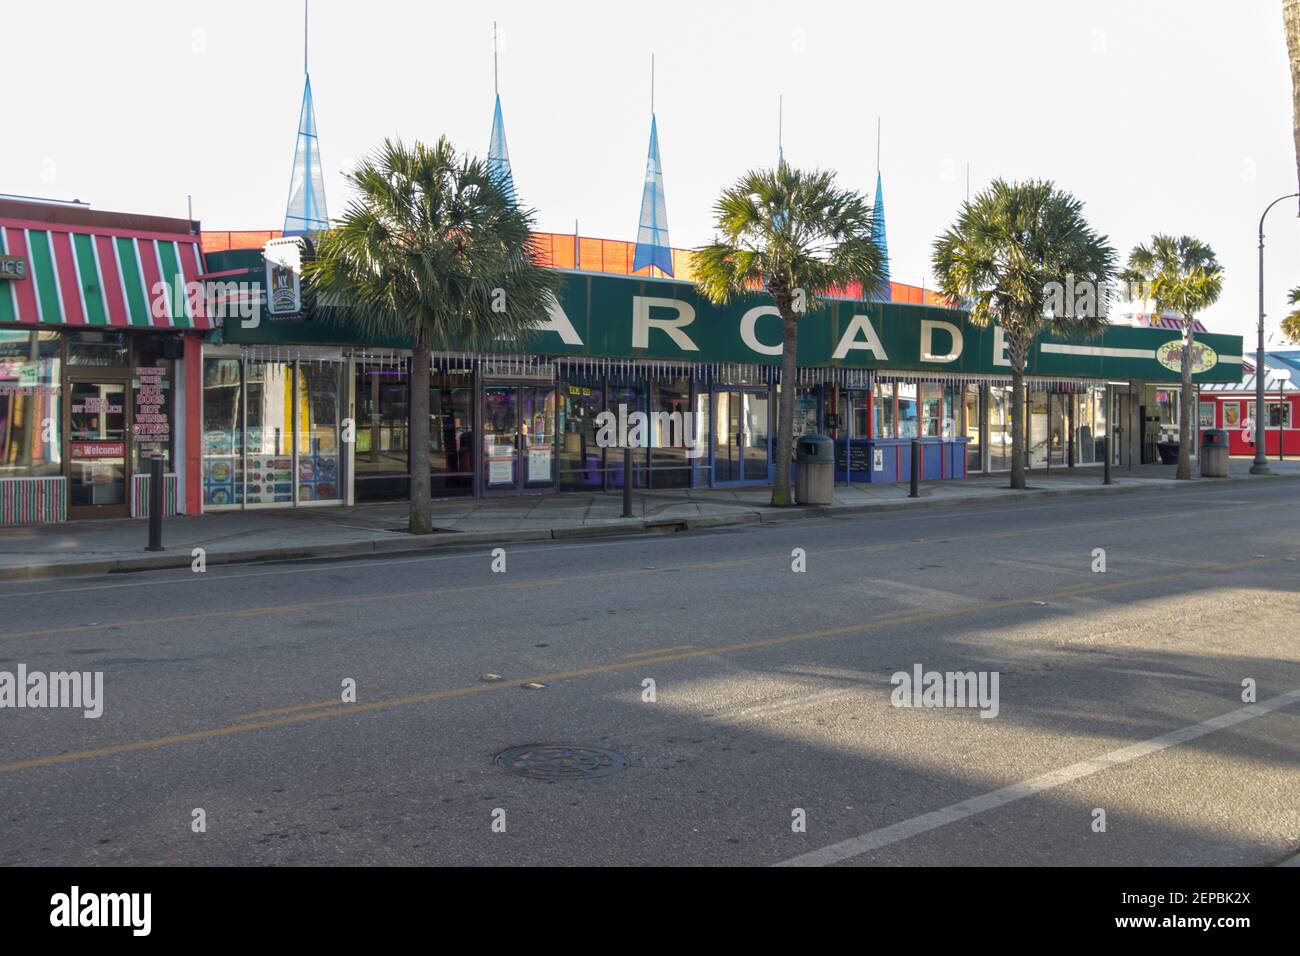 Myrtle Beach, South Carolina, USA - February 25, 2021: Entrance of vintage arcade located in the downtown district of Myrtle Beach, South Carolina. Stock Photo